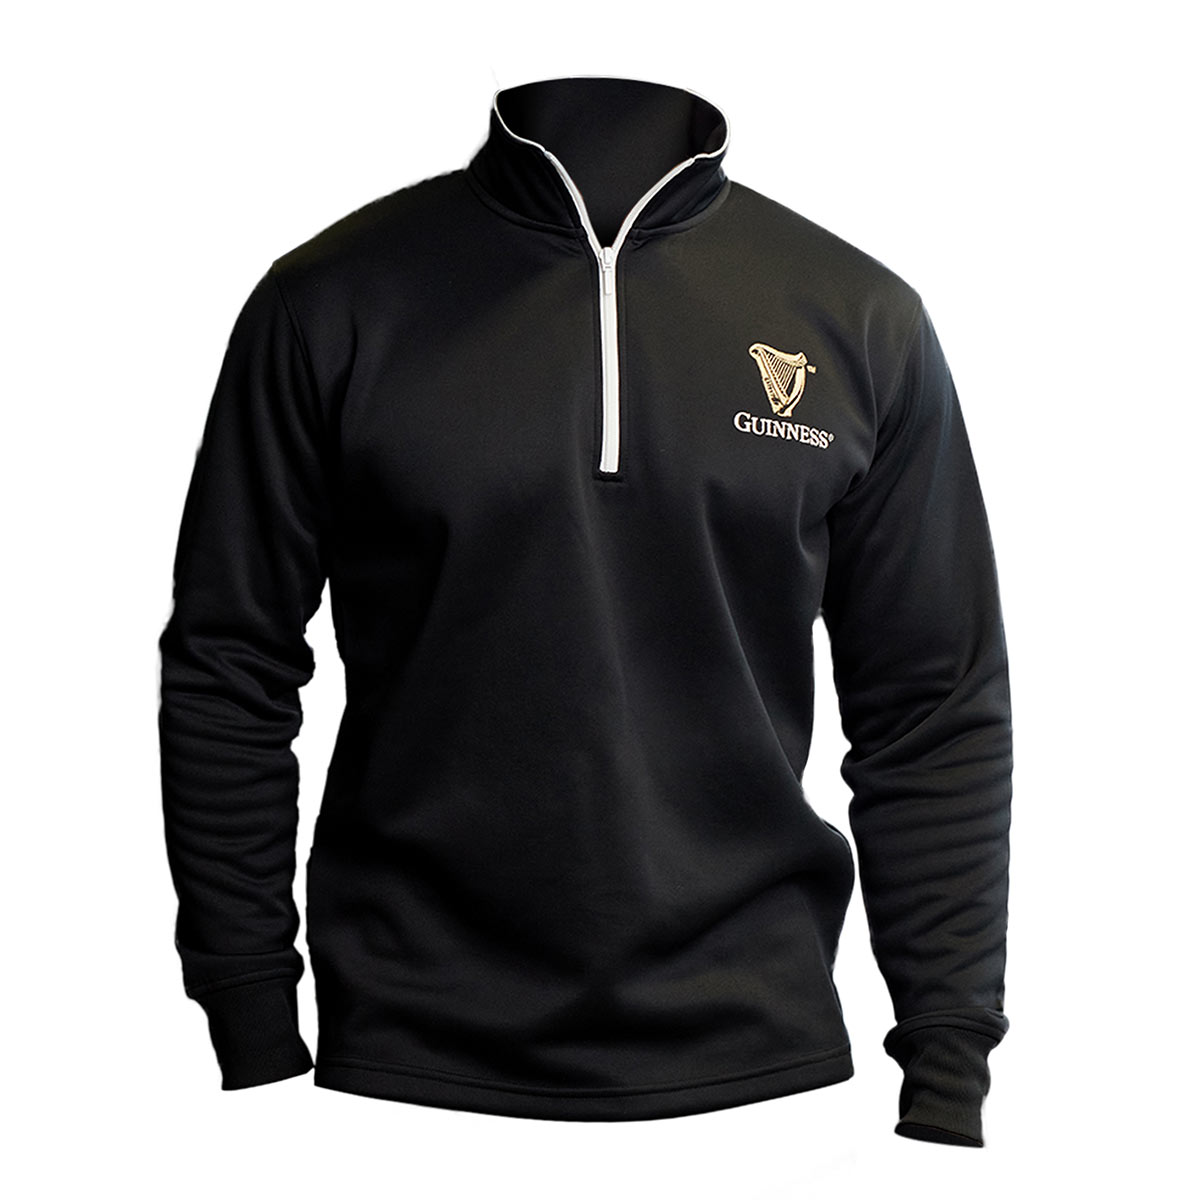 A men's Guinness Harp Half Zip Sweater, perfect for any fan, in black and white.